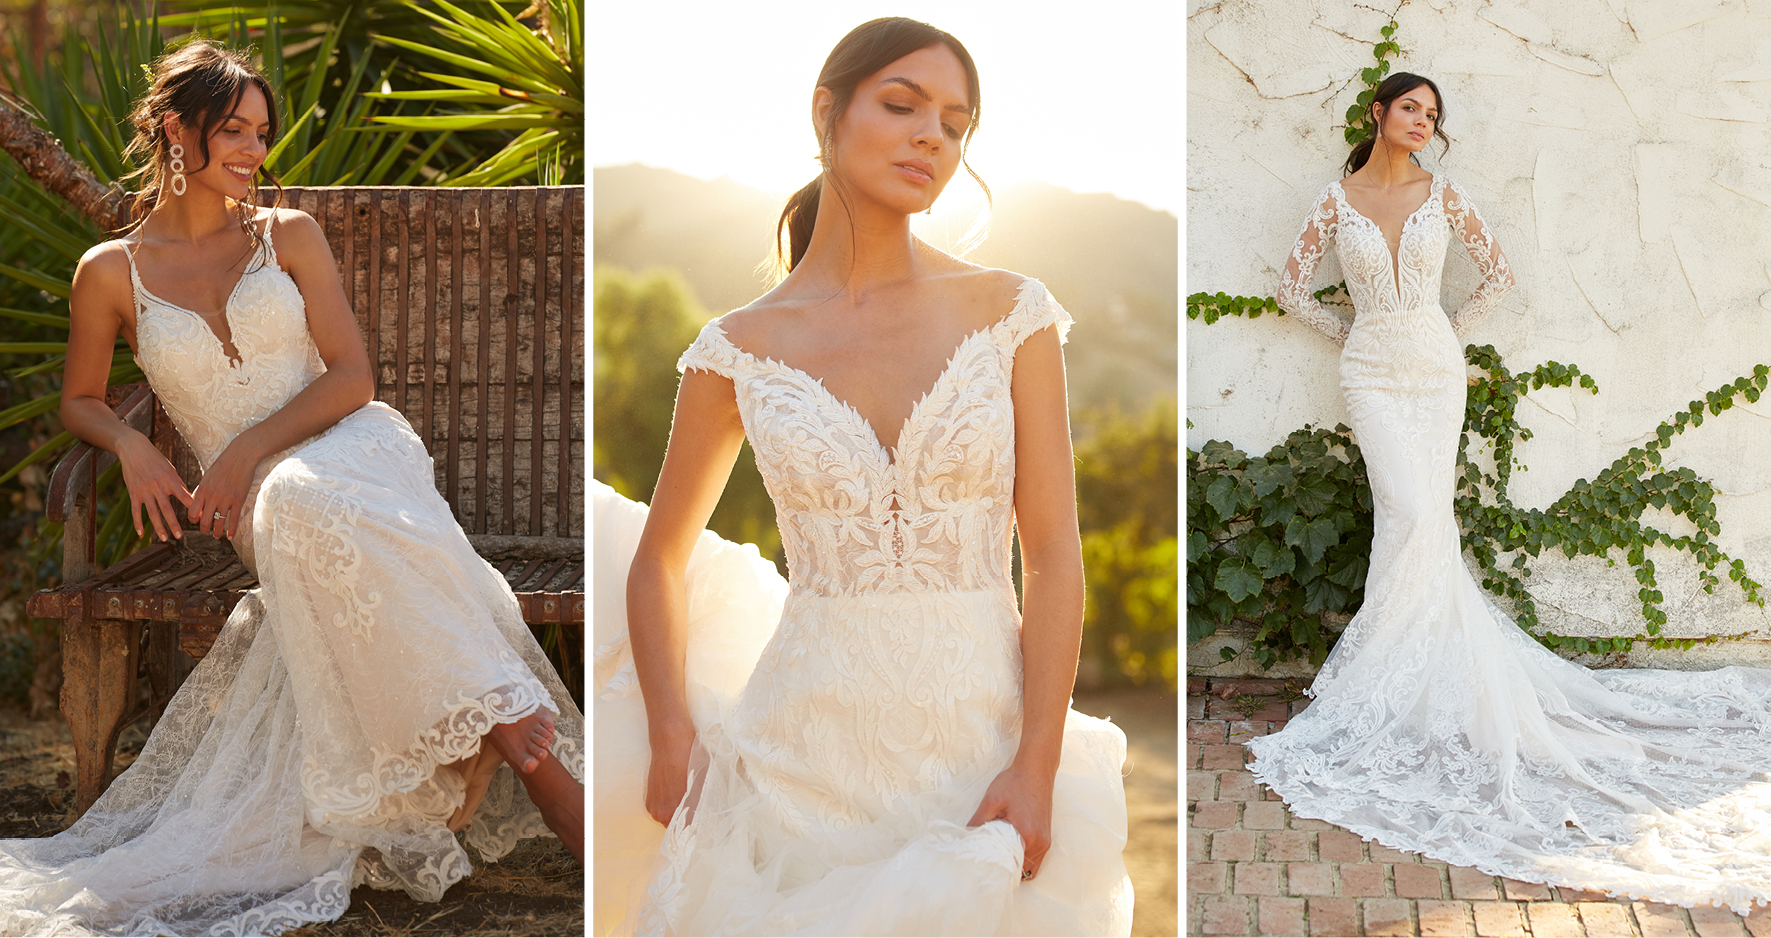 These Disney-inspired wedding dresses are simply magical | Life